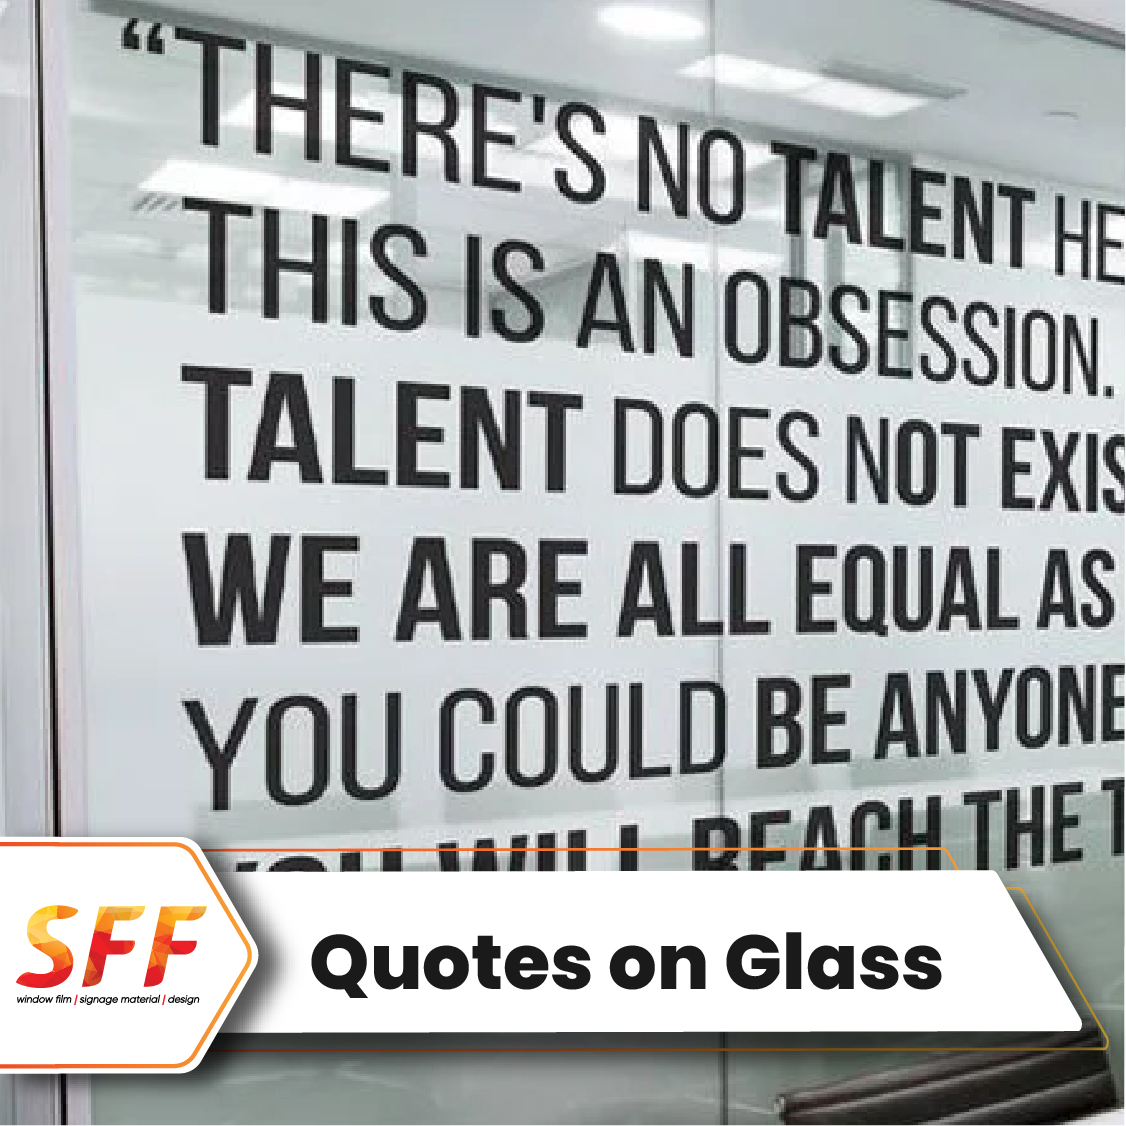 Quotes on Glass